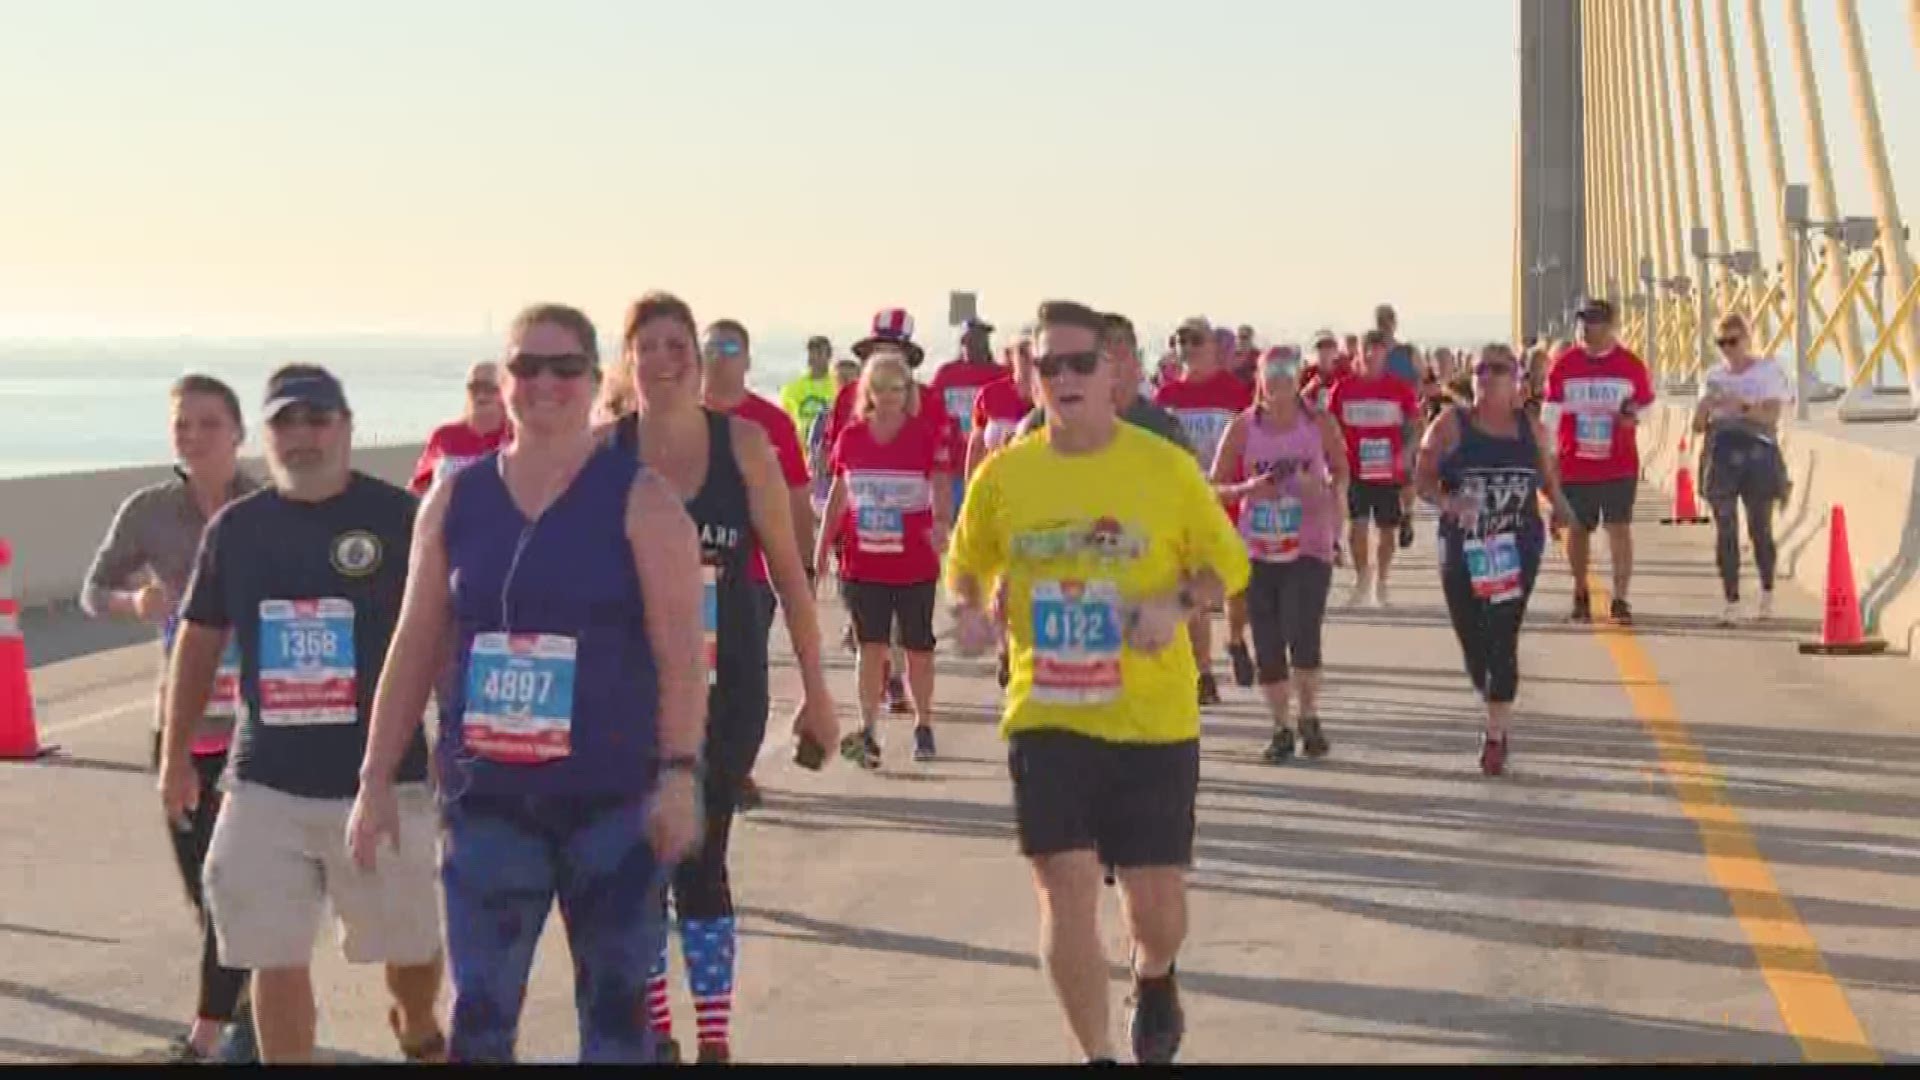 One-hundred percent of the proceeds from the race go to help military families. The race will be on 10News WTSP starting at 7 a.m. March 1.